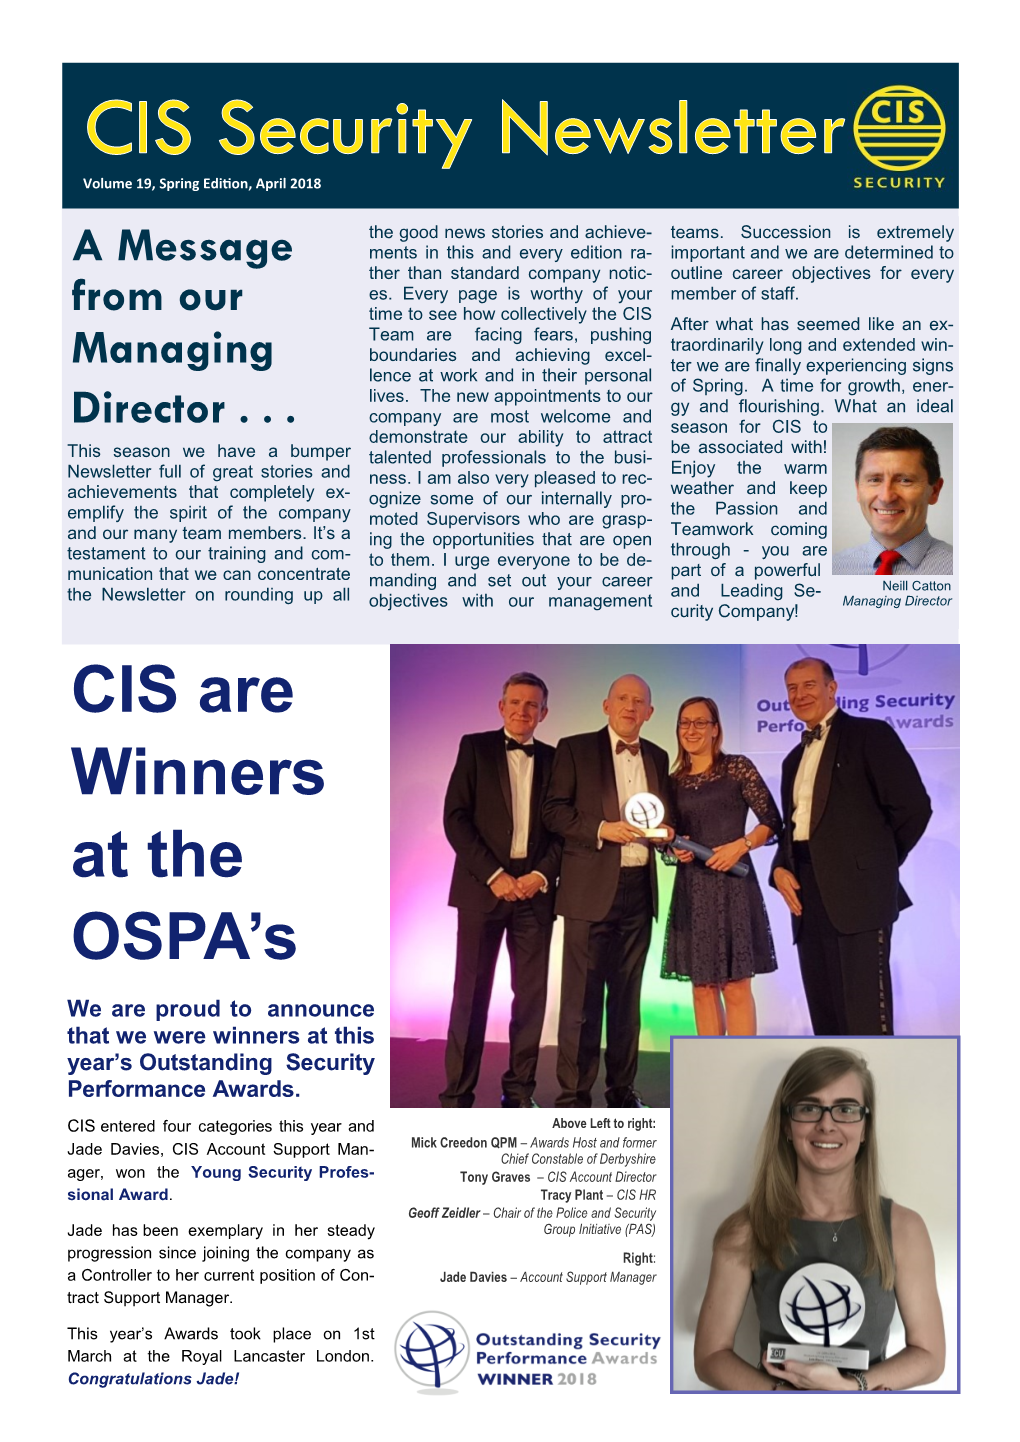 CIS Security Newsletter Spring 2018